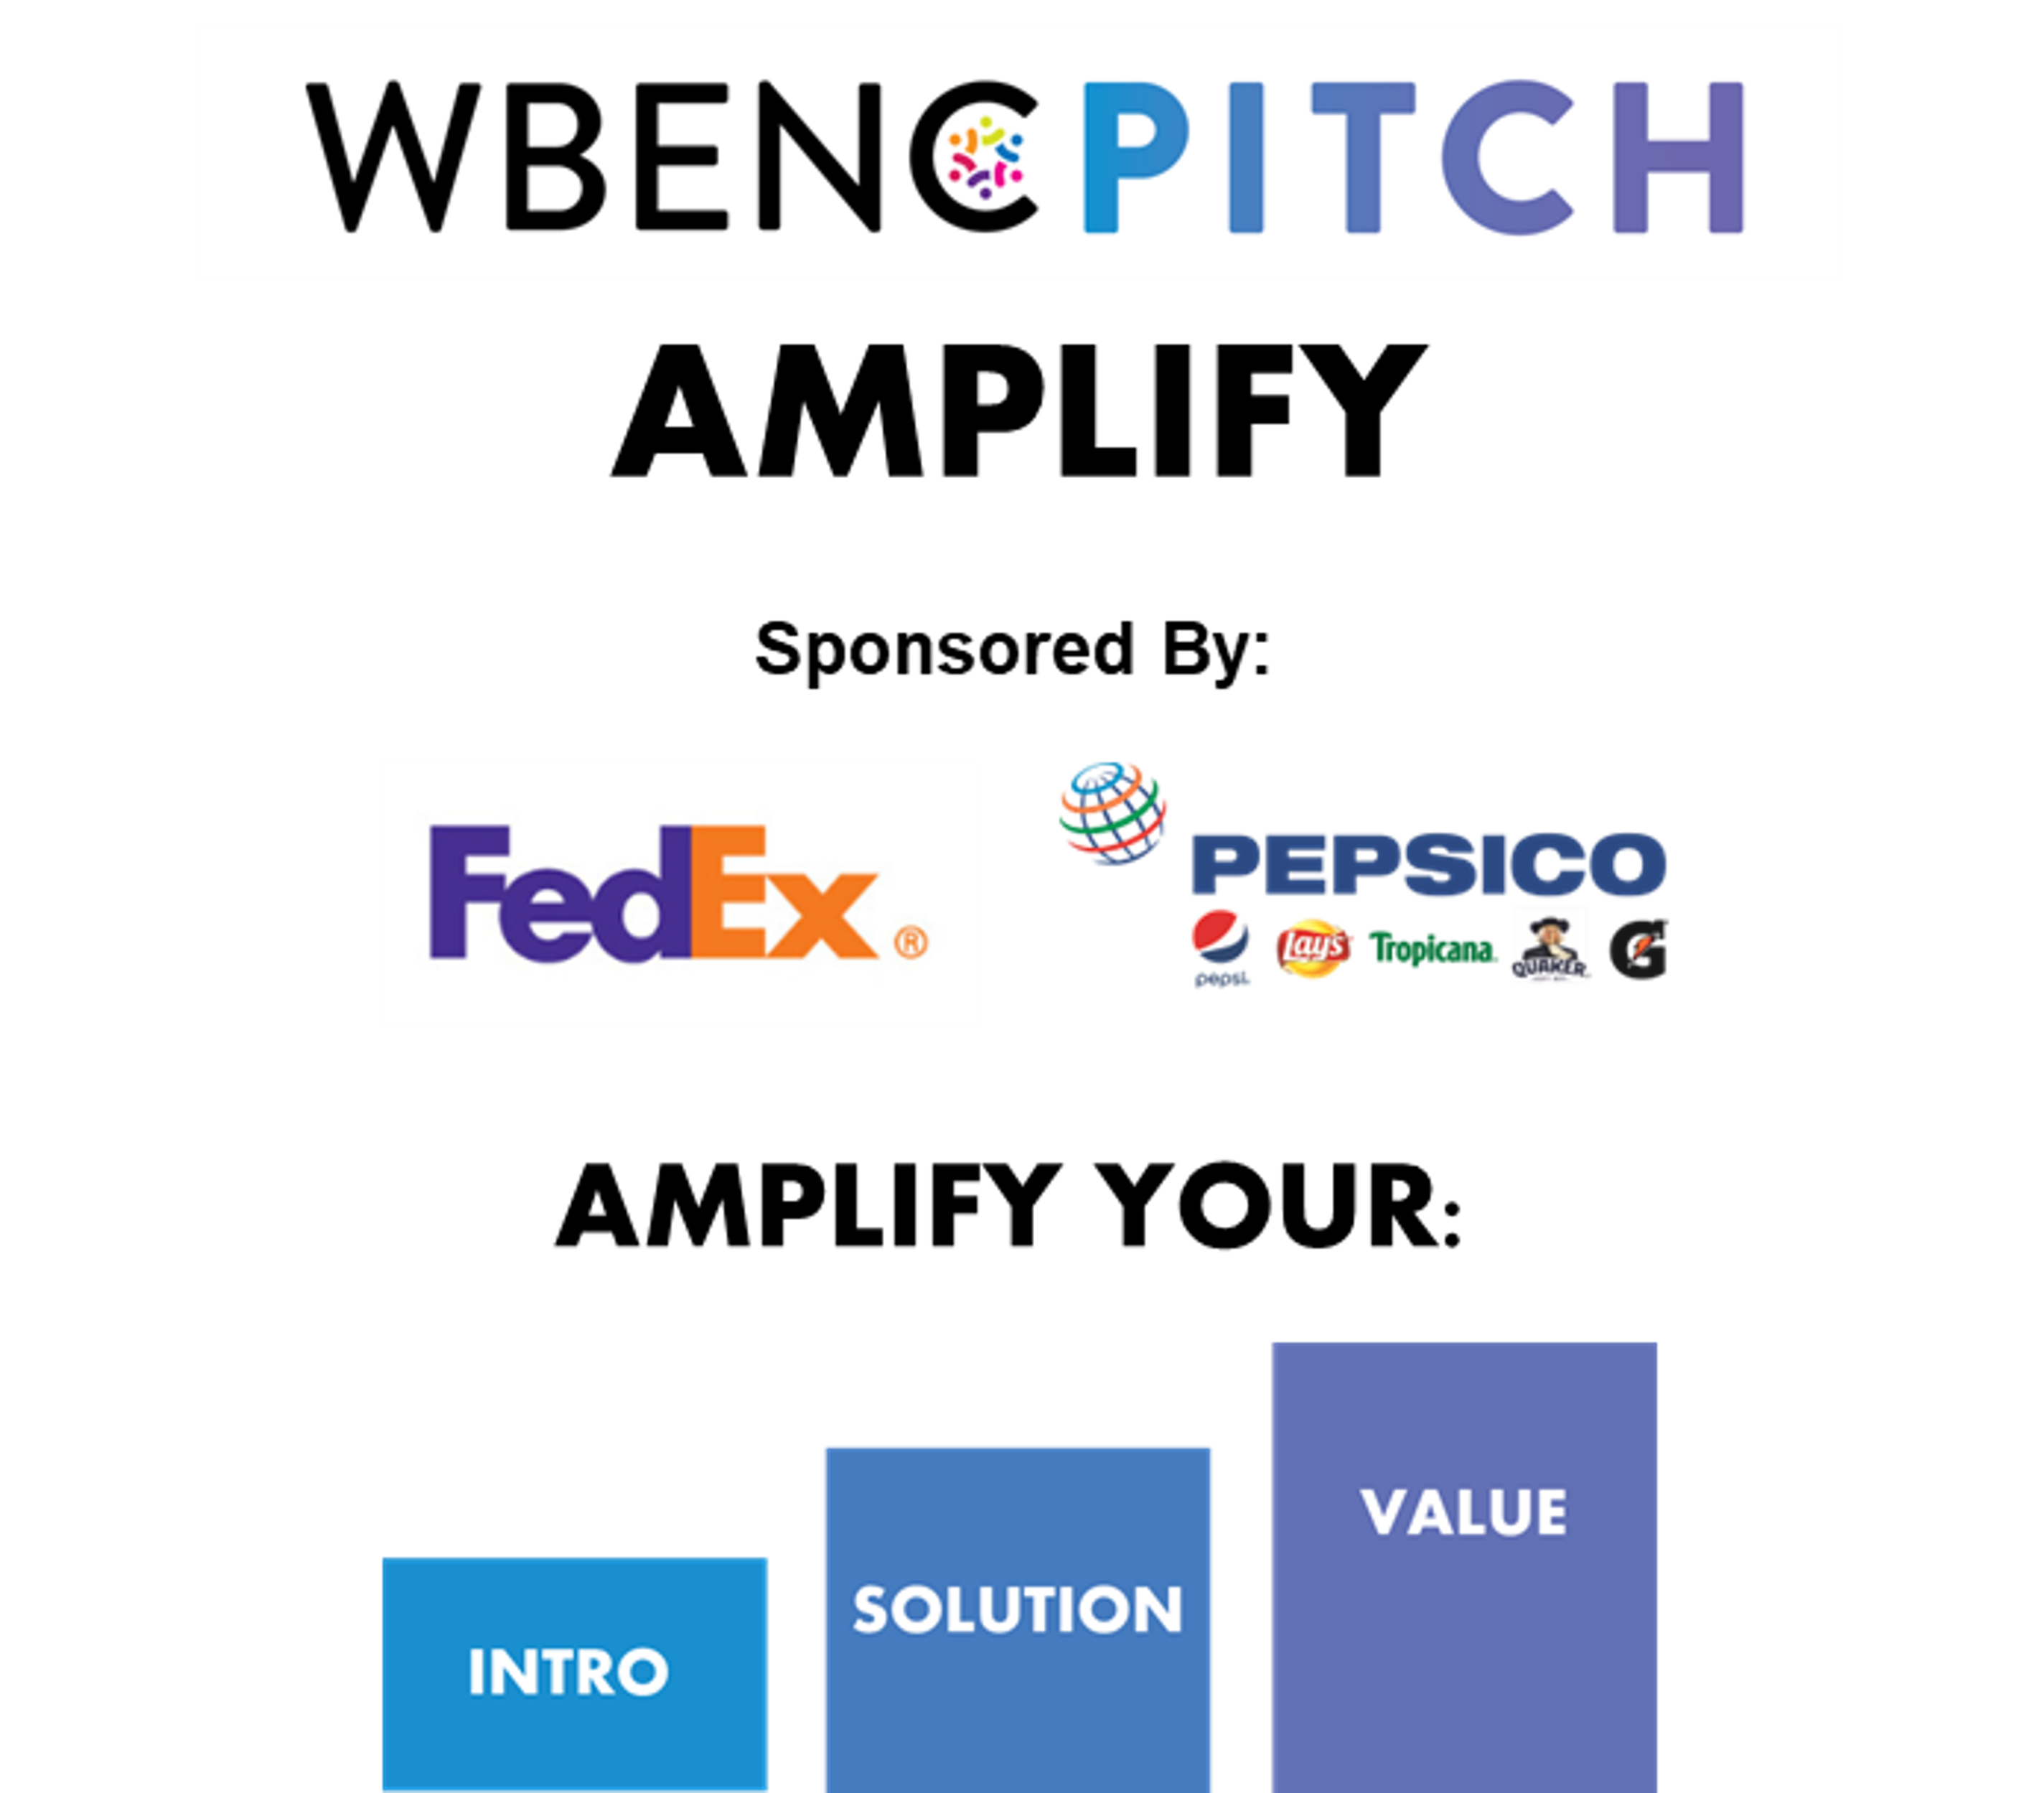 WBENC PITCH AMPLIFY logo. Sponsored by FedEx and PepsciCo.